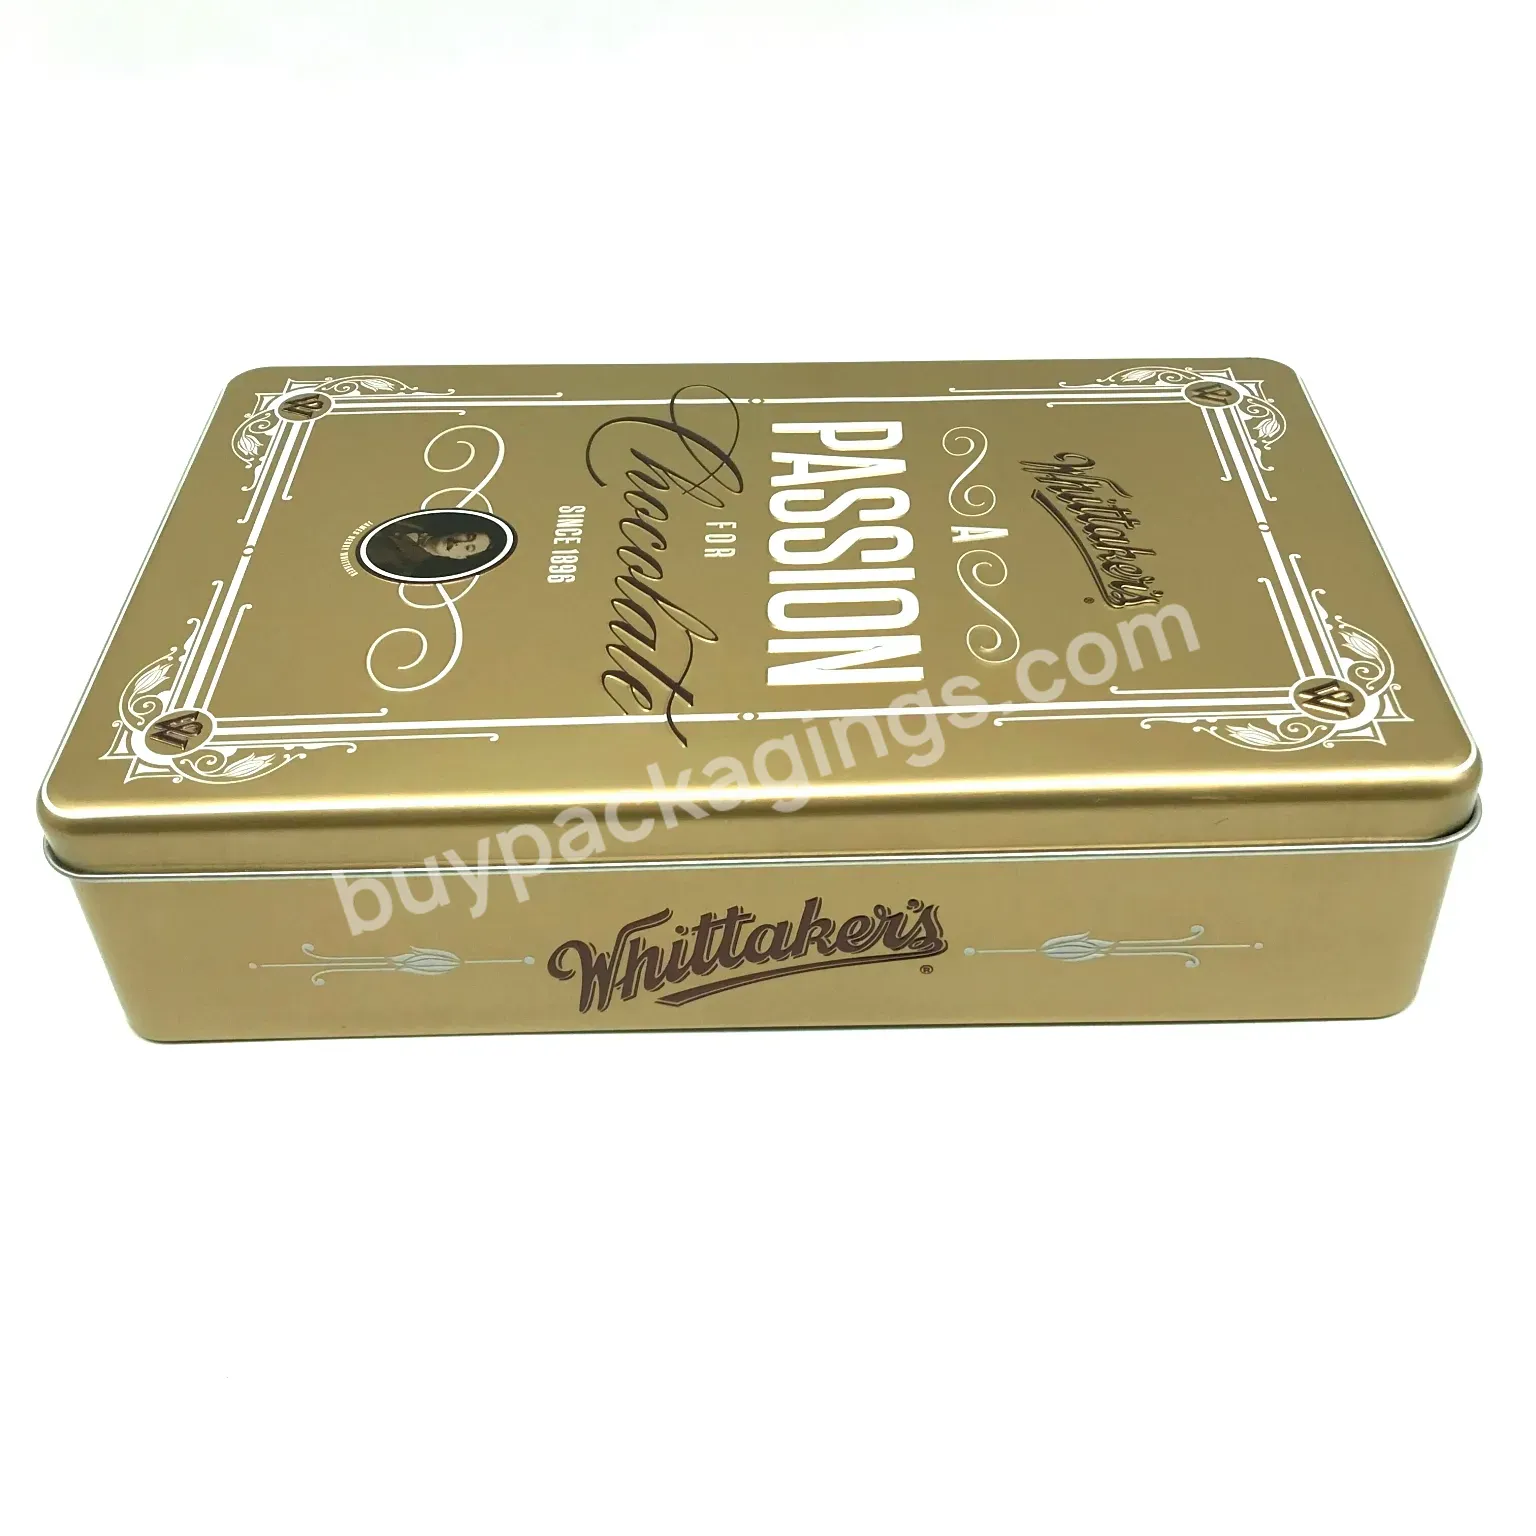 Empty Gift Tin Boxes For Chocolates - Buy Gift Tin Boxes For Chocolates,Gift Tin Boxes For Chocolate Packaging,Decorative Tin Boxes For Chocolates.